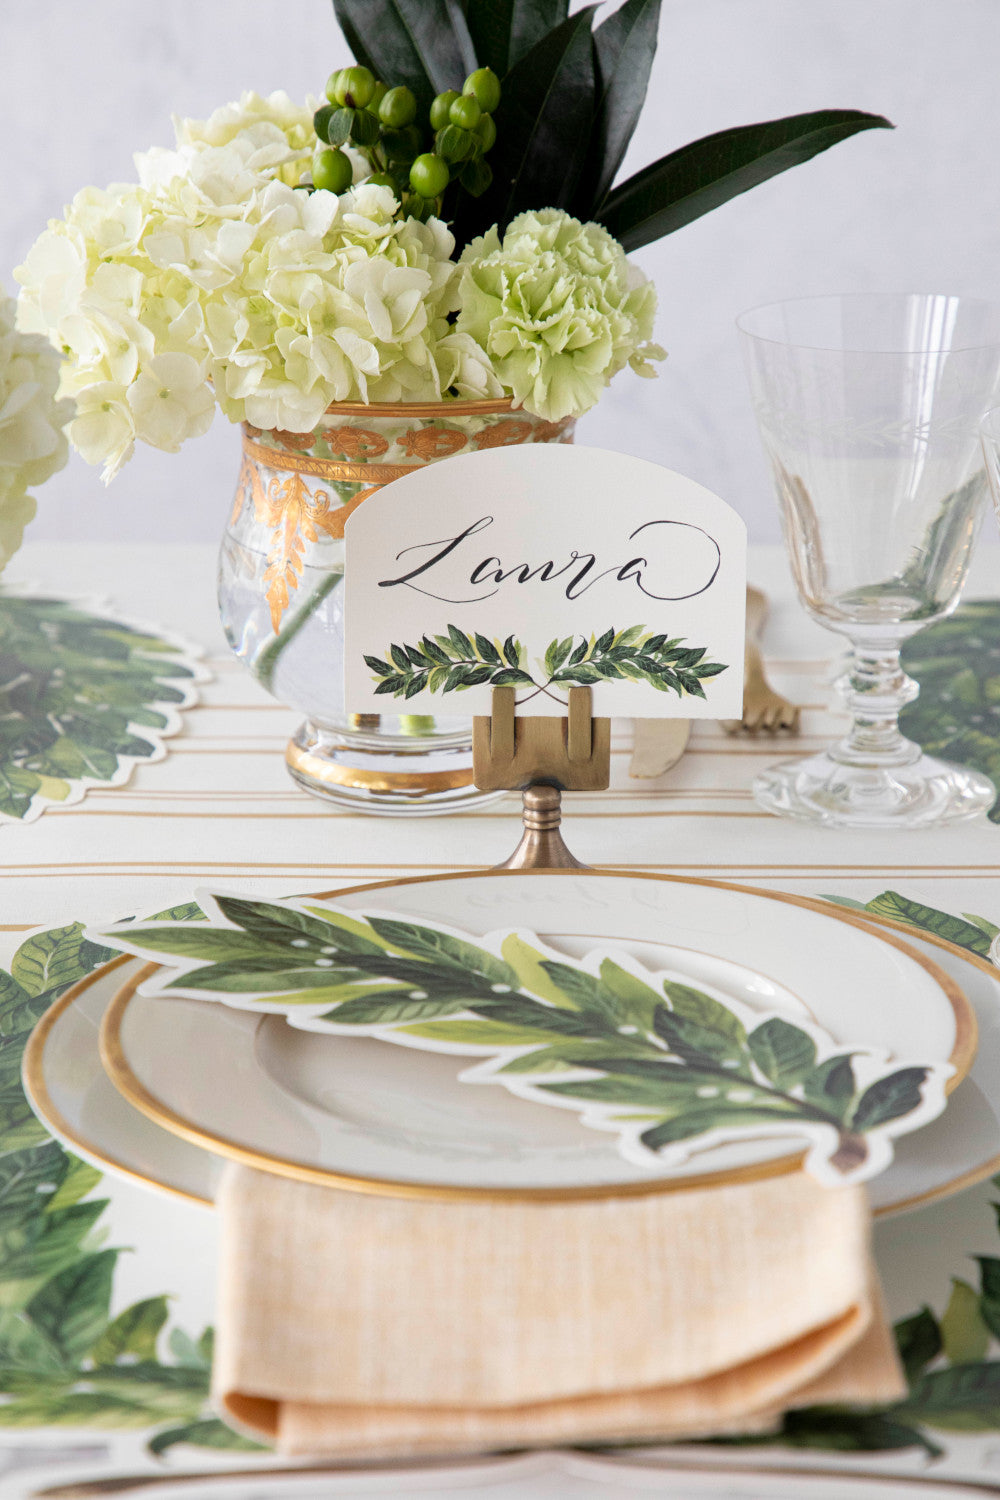 An elegant place setting featuring a Laurel Place Card labeled &quot;Laura&quot; in a brass place card holder behind the plate.